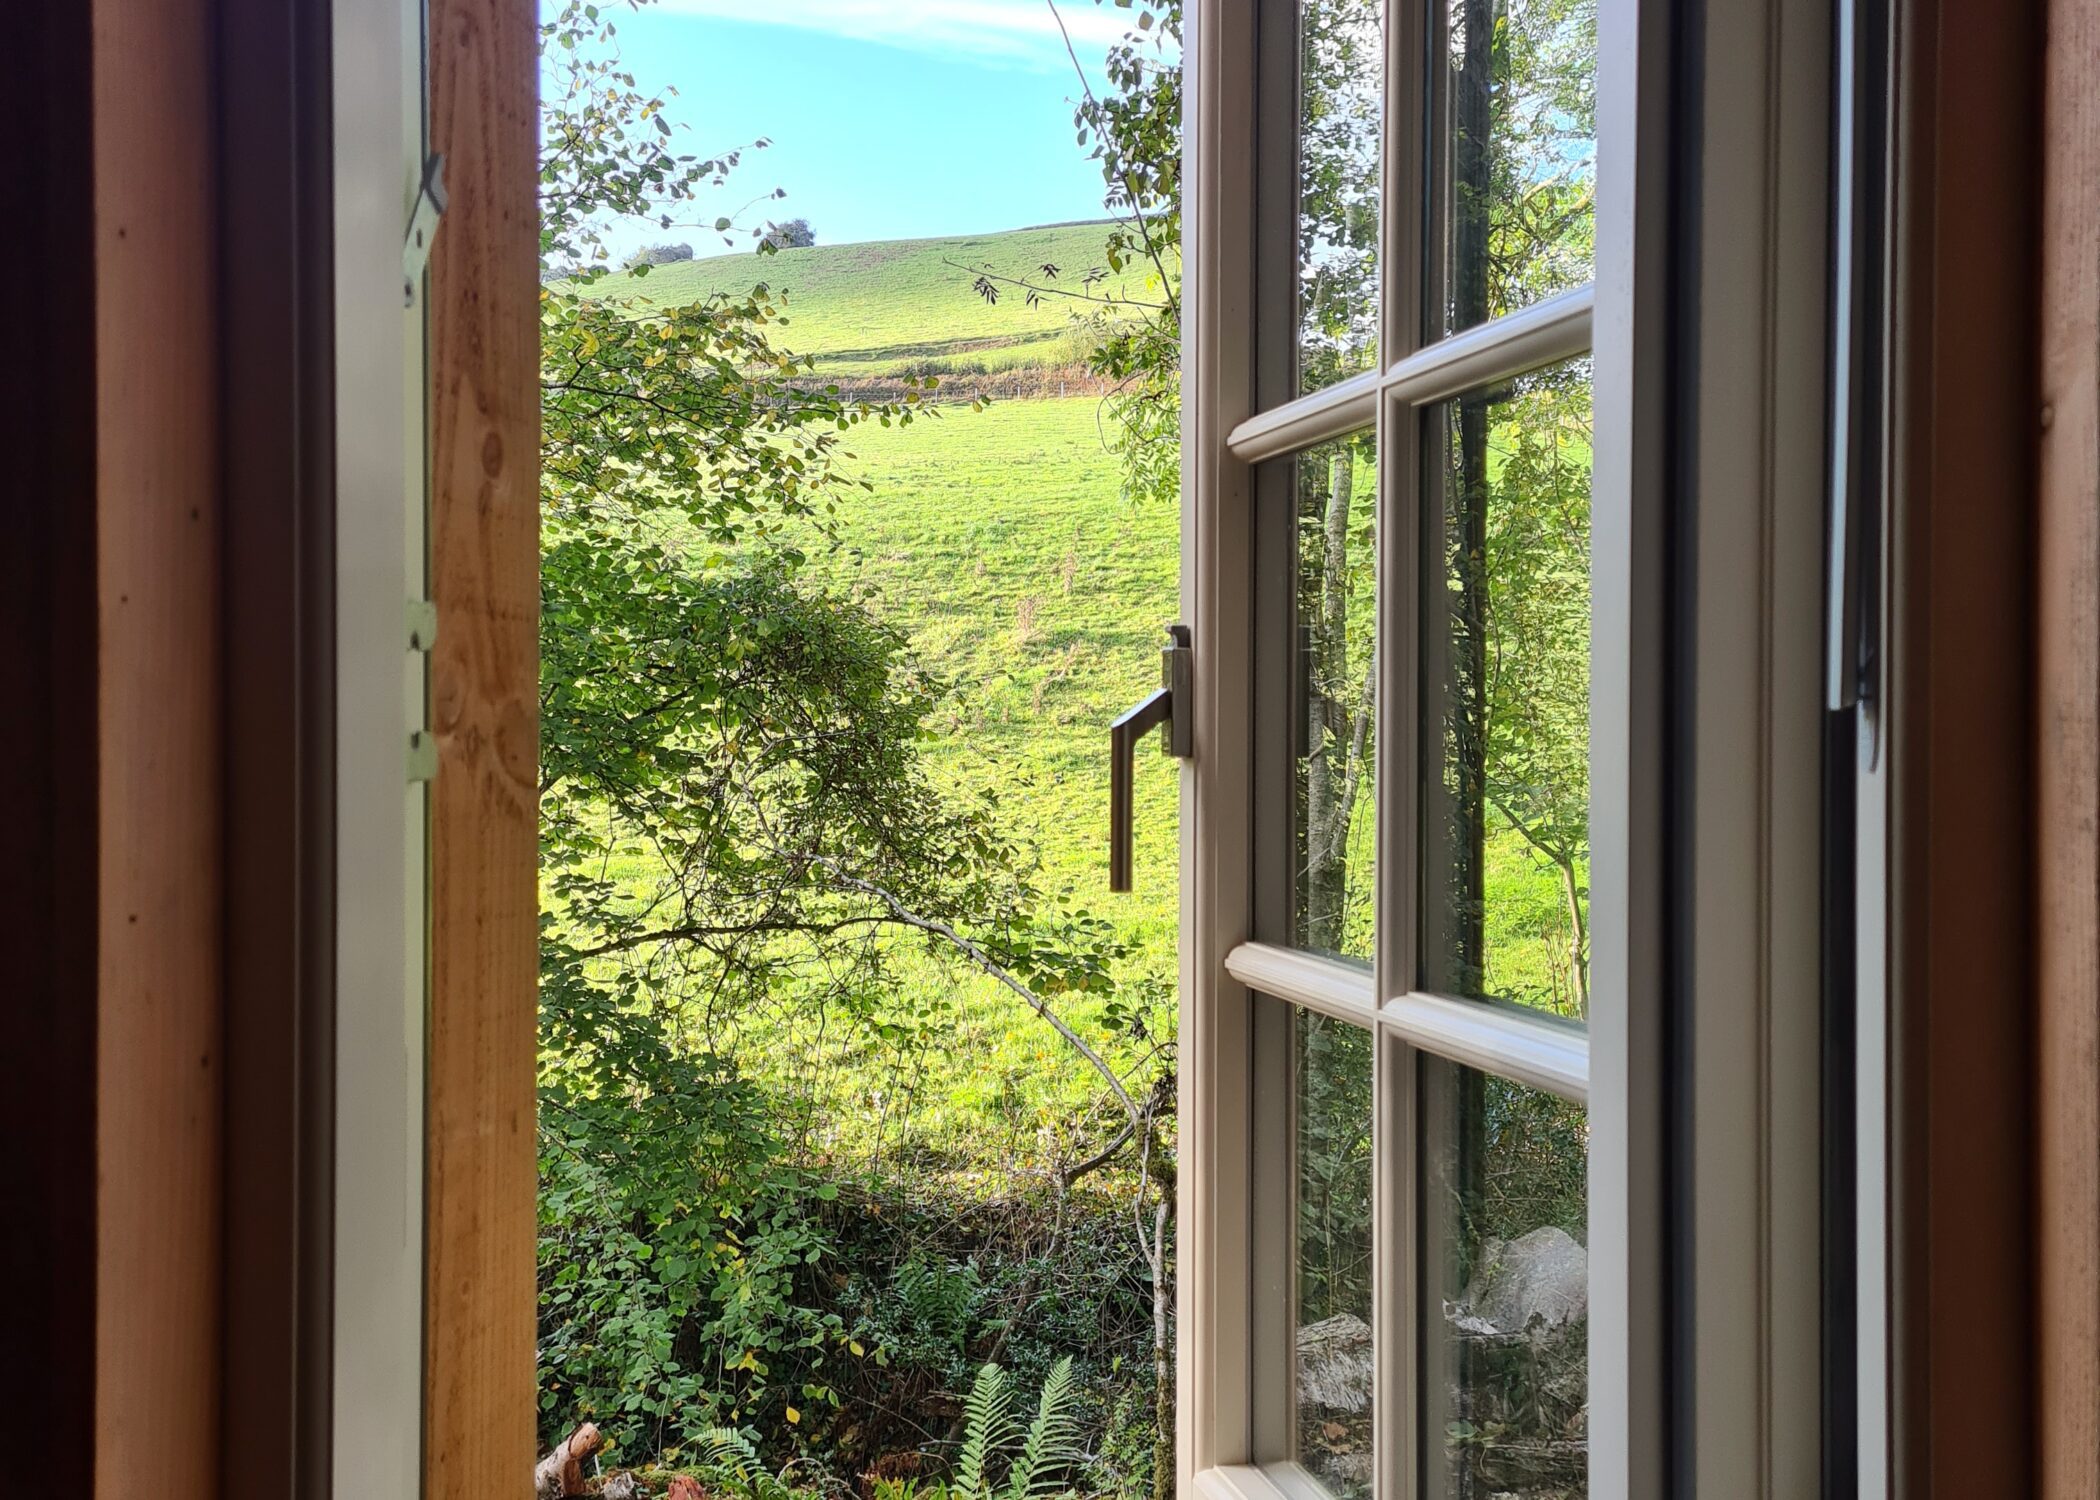 View looking out of Rationel windows with casement bars.